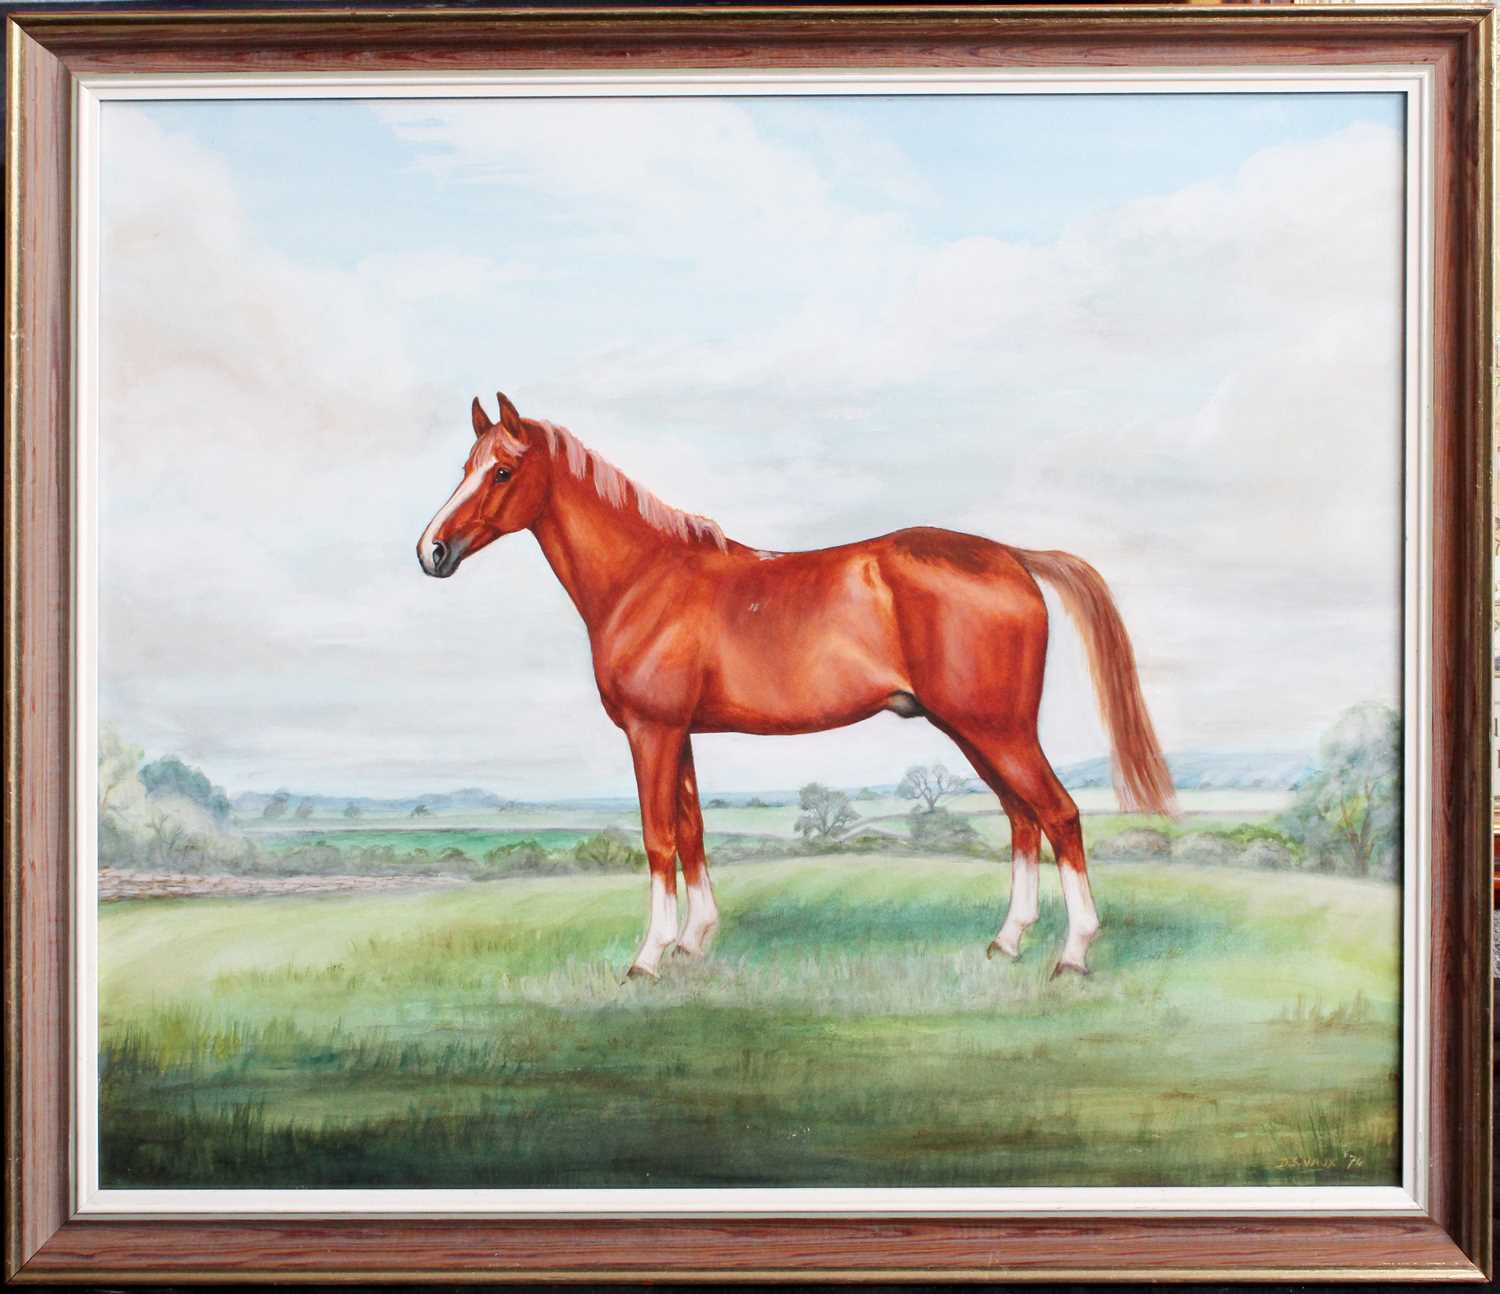 D*S* Vaux (20th Century) Study of a chestnut horse Signed and dated (19)74, watercolour, 49.5cm by - Image 2 of 2